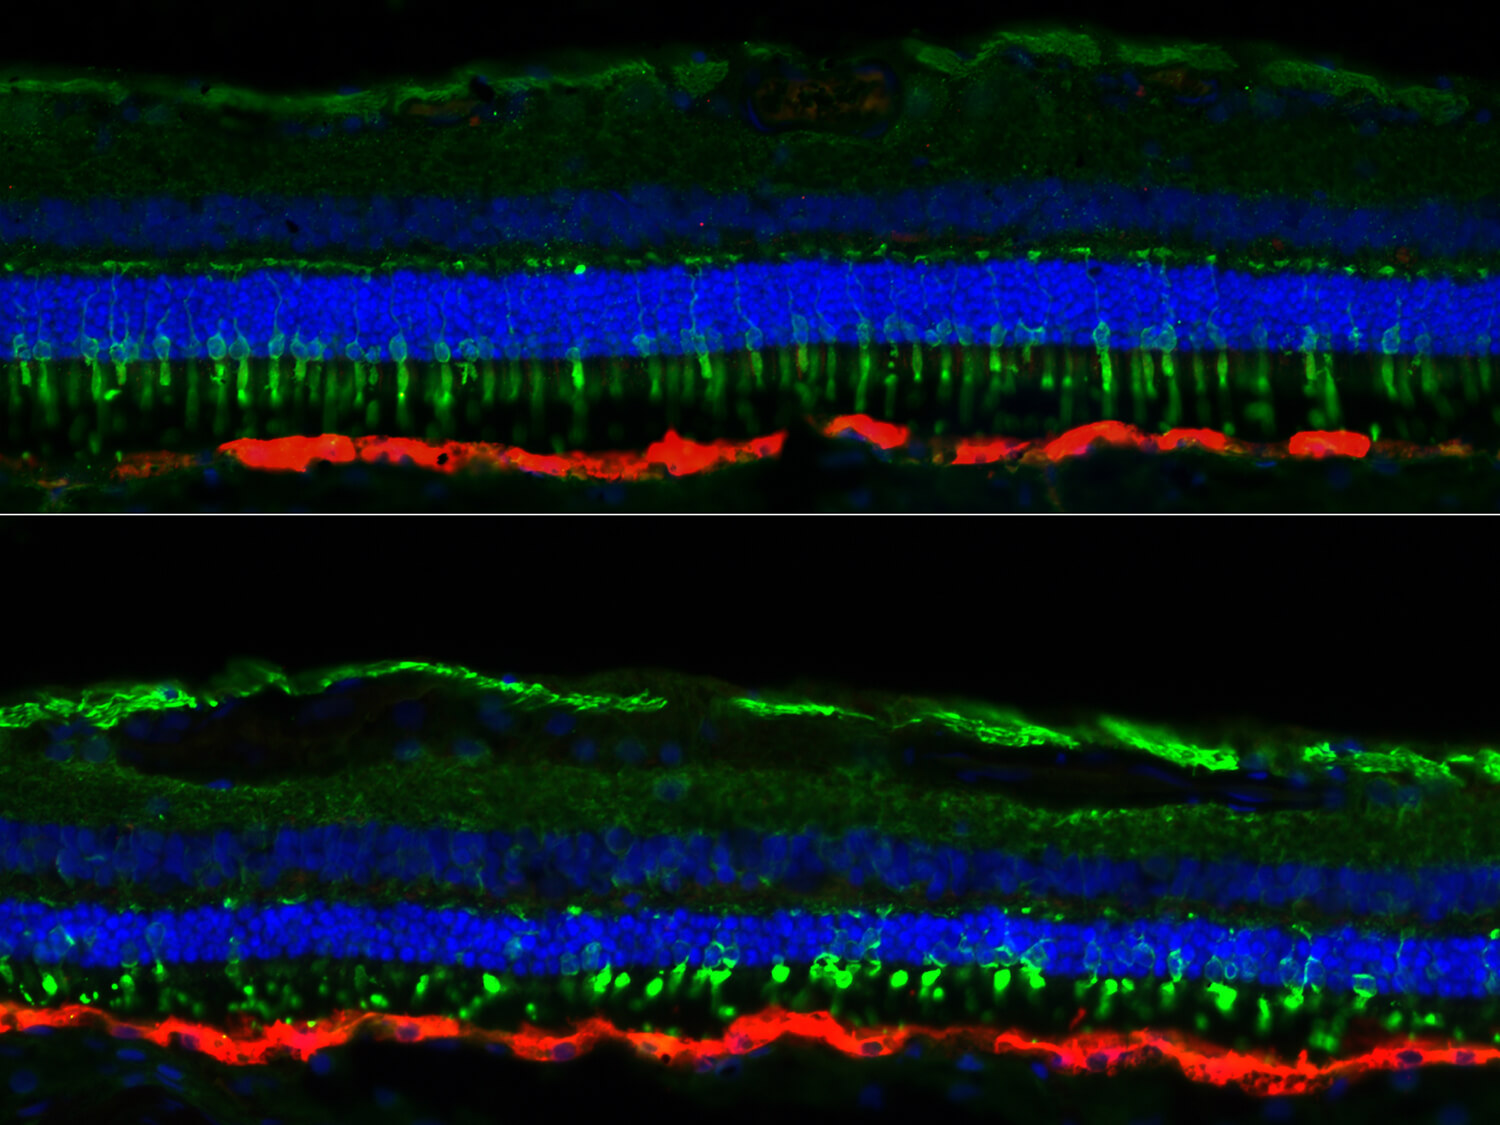 Using a canine model of the vision disorder Leber congenital amaurosis, Penn researchers found that photoreceptor cells continue to deteriorate after treatment if it is given too late.